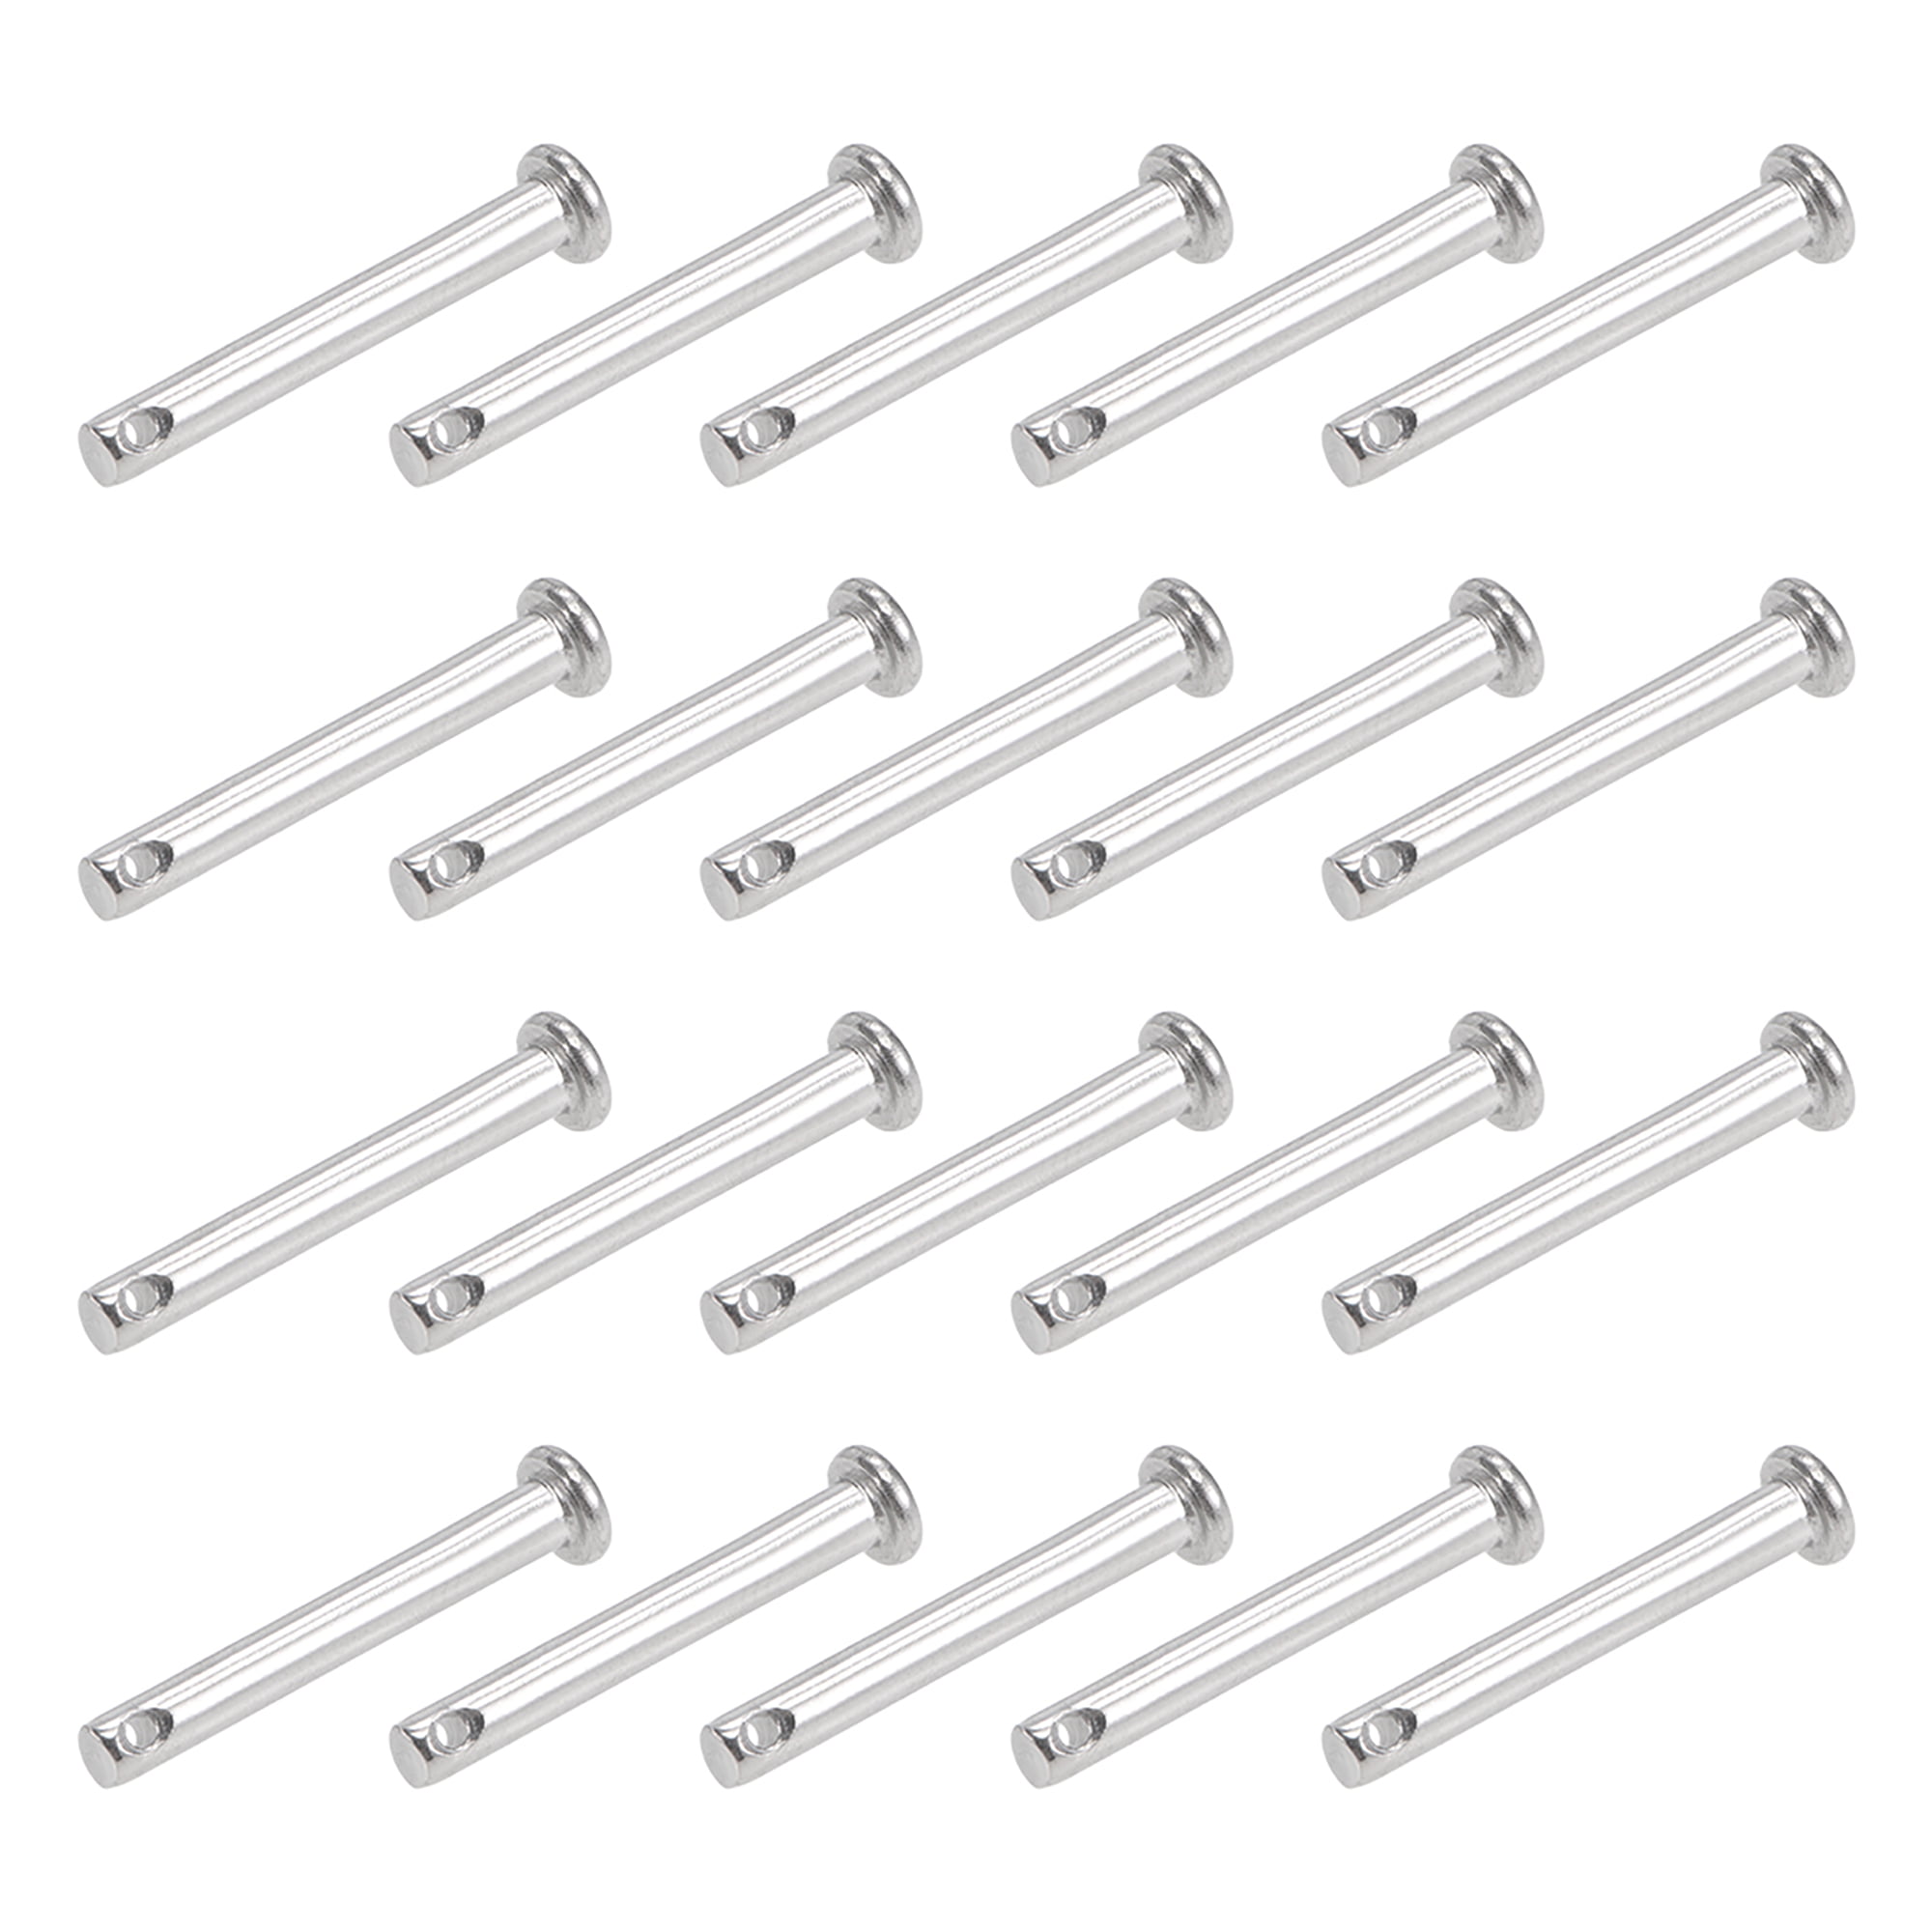 Single Hole Clevis Pins 4mm x 16mm Flat Head 304 Stainless Steel Pin 20Pcs